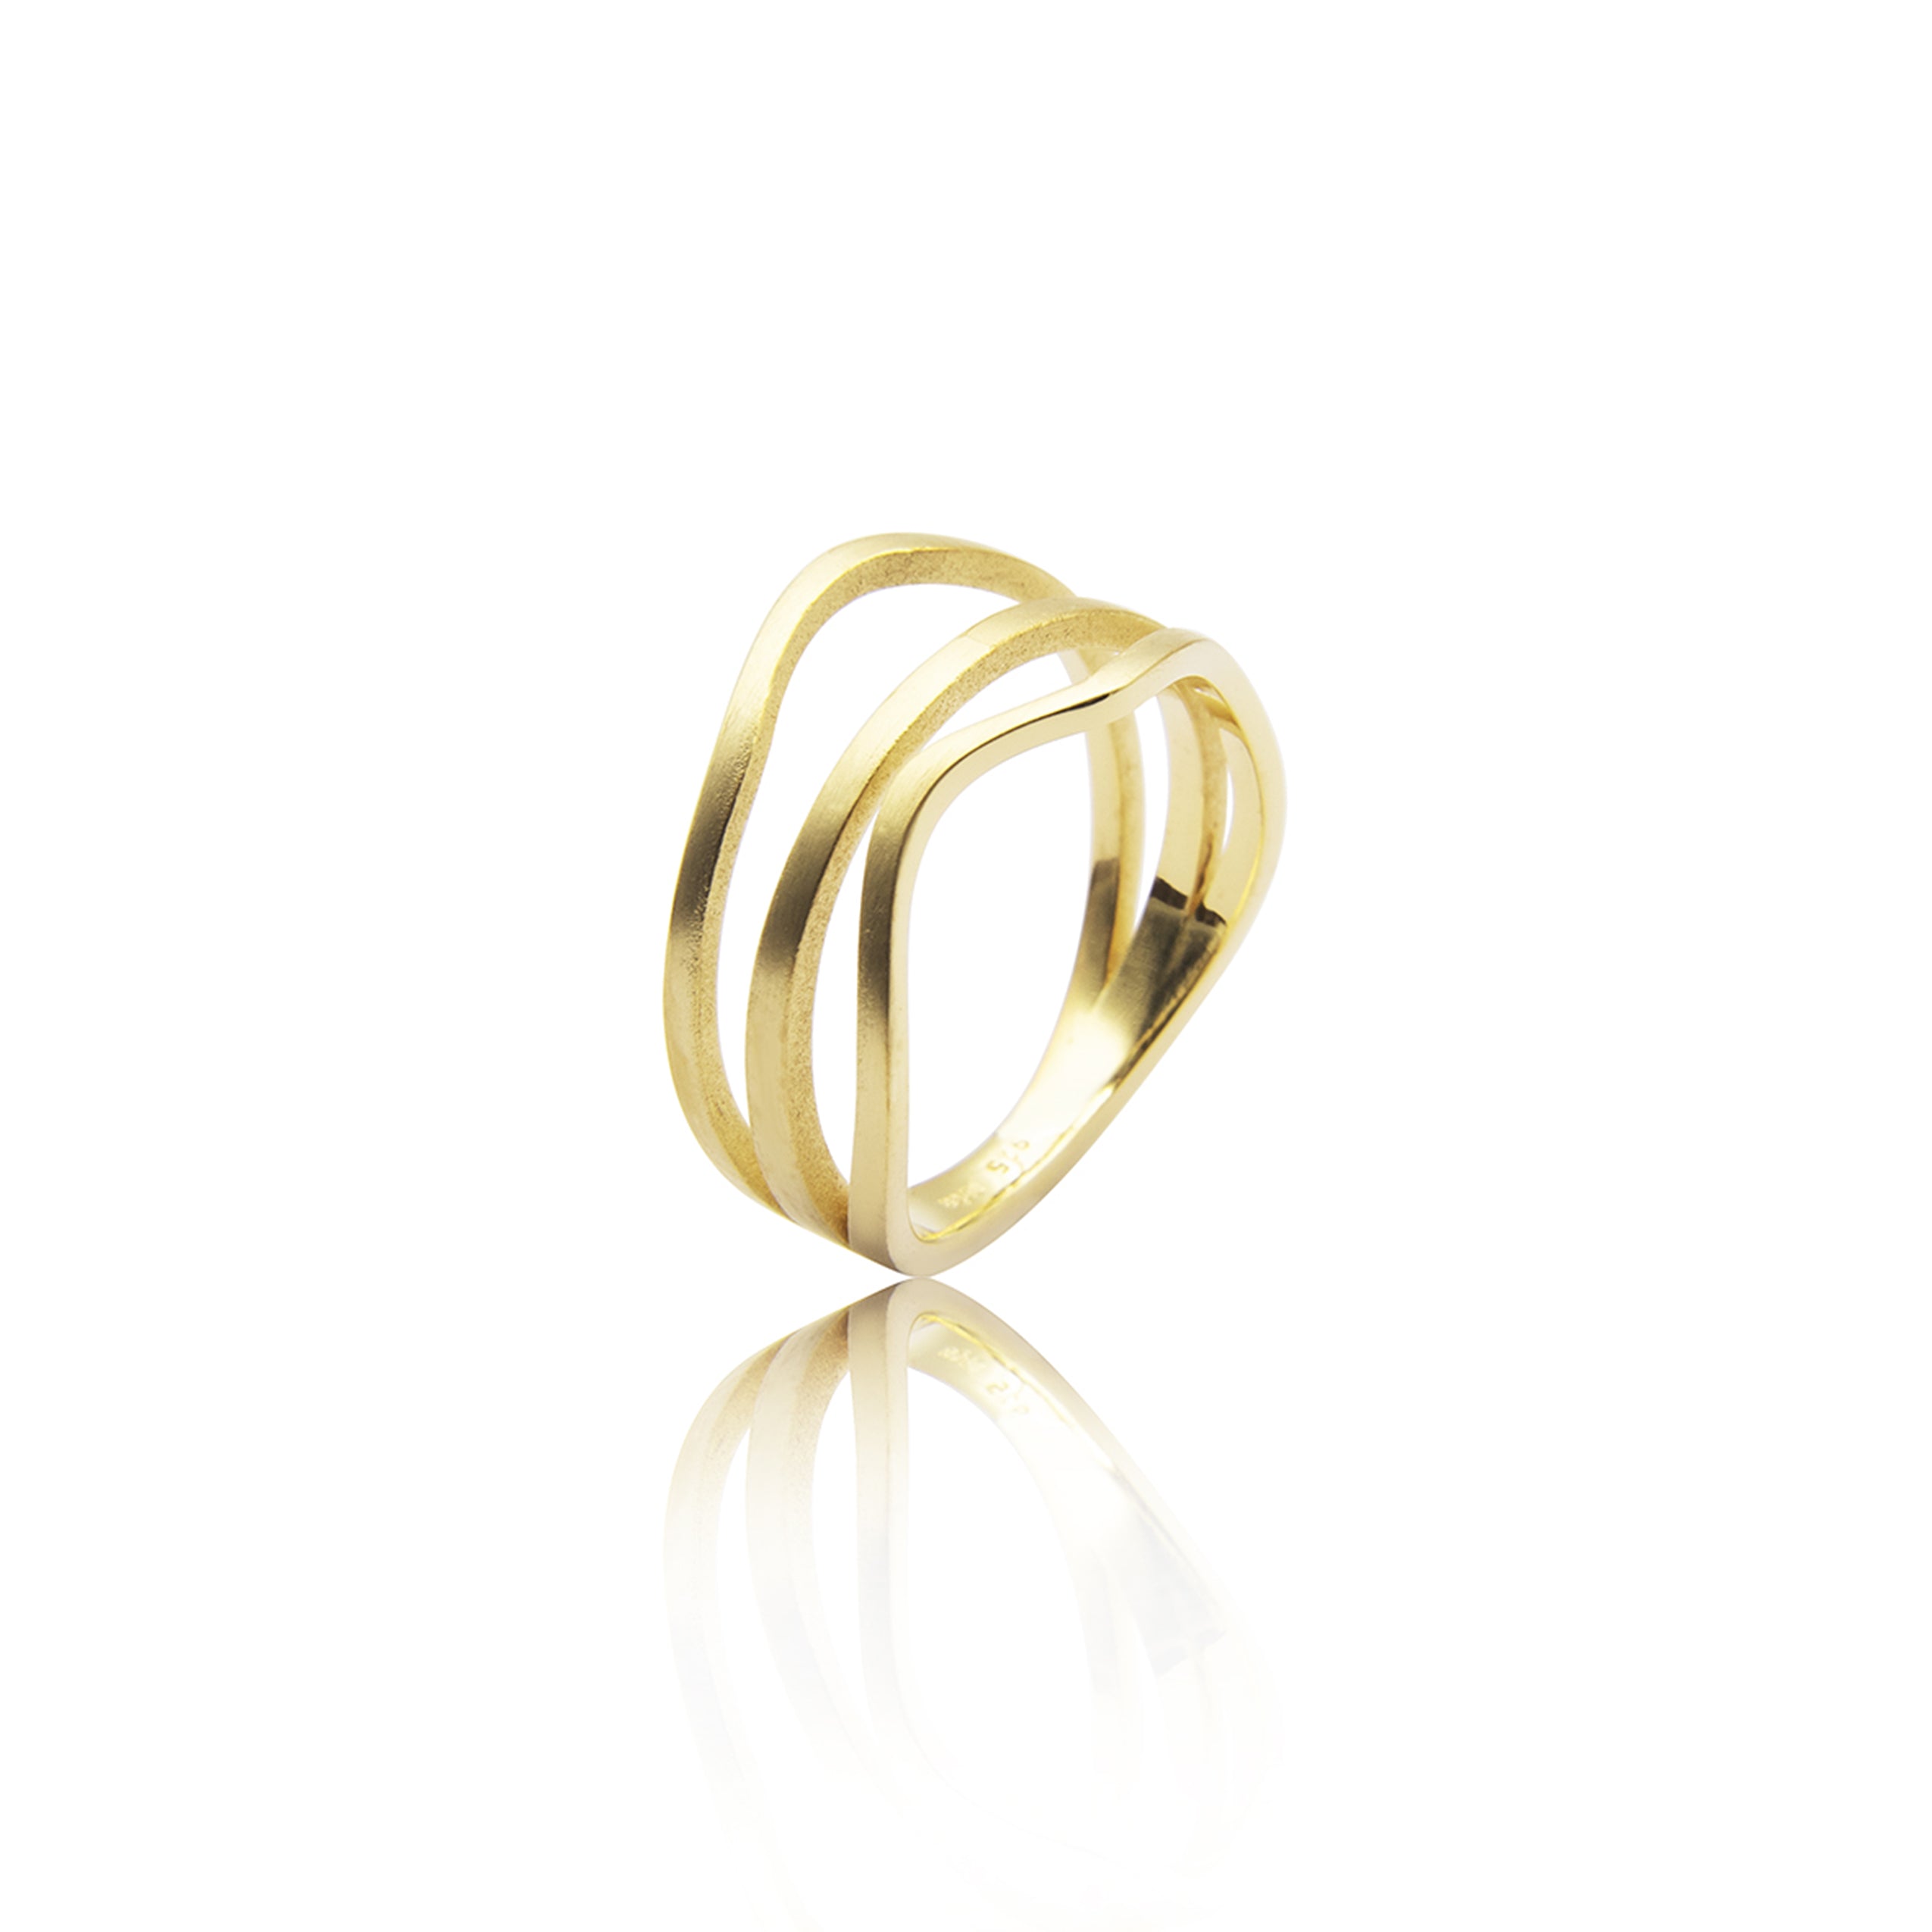 Cascade ring "3" in 585 gold